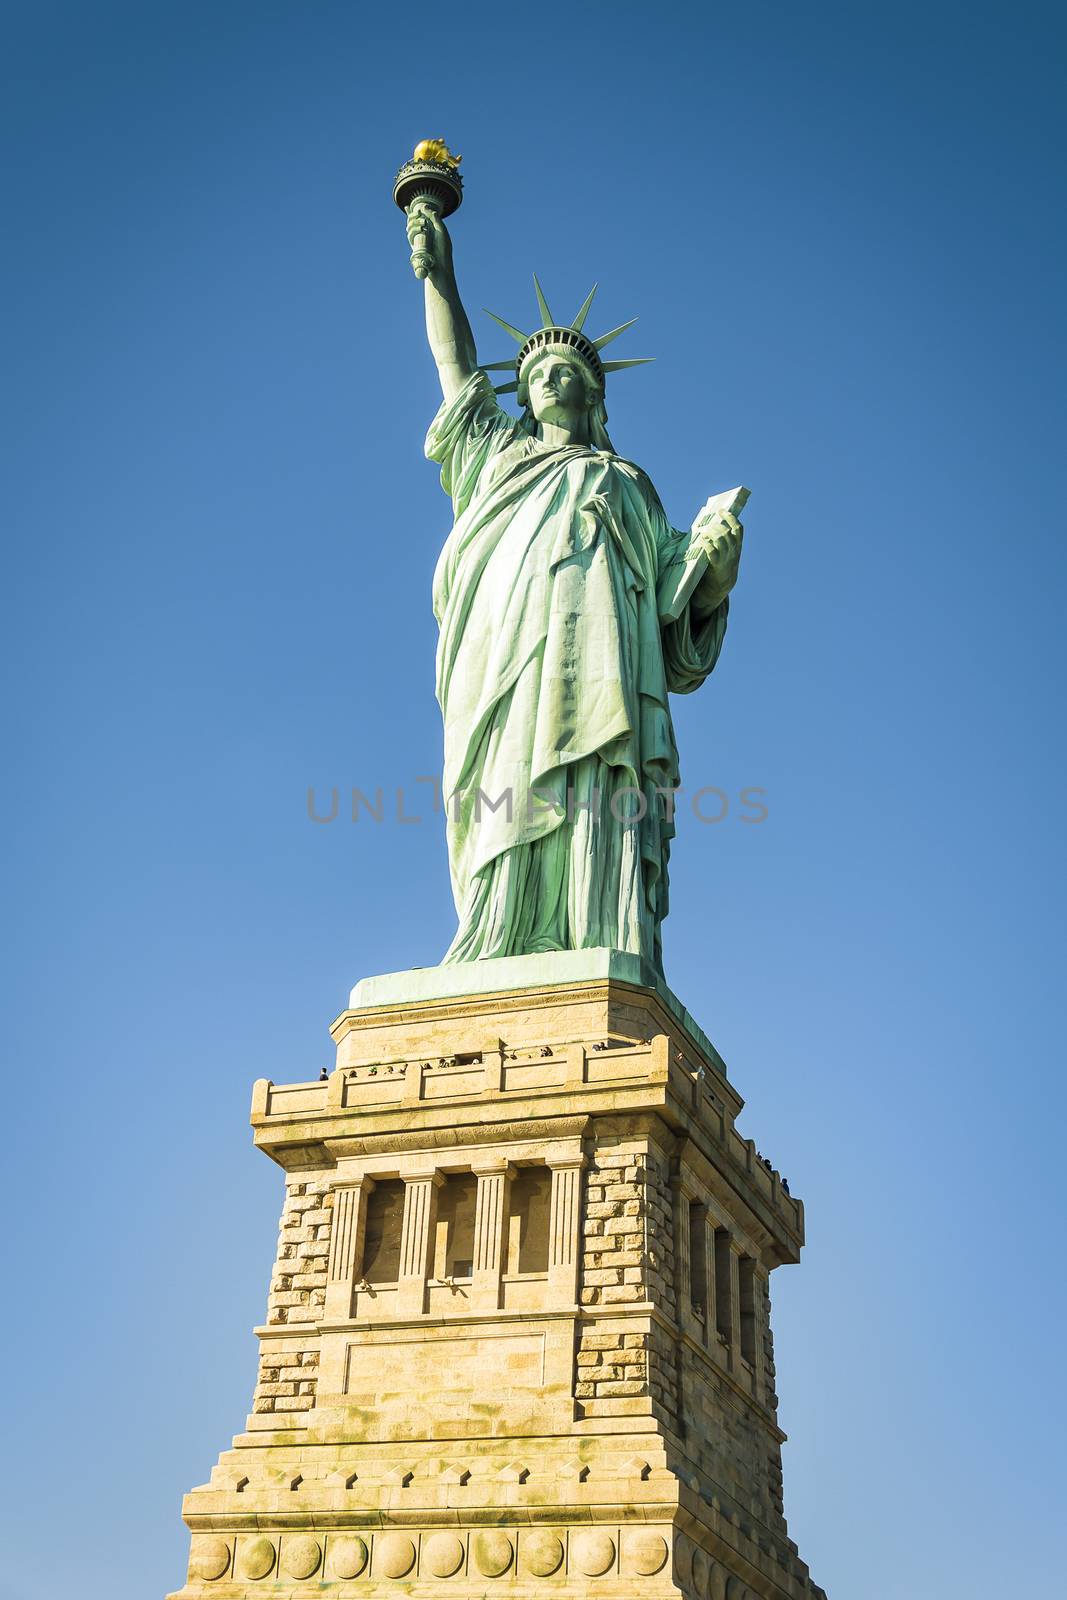 Bottom view of the famous Statue of Liberty, icon of freedom and of the United States